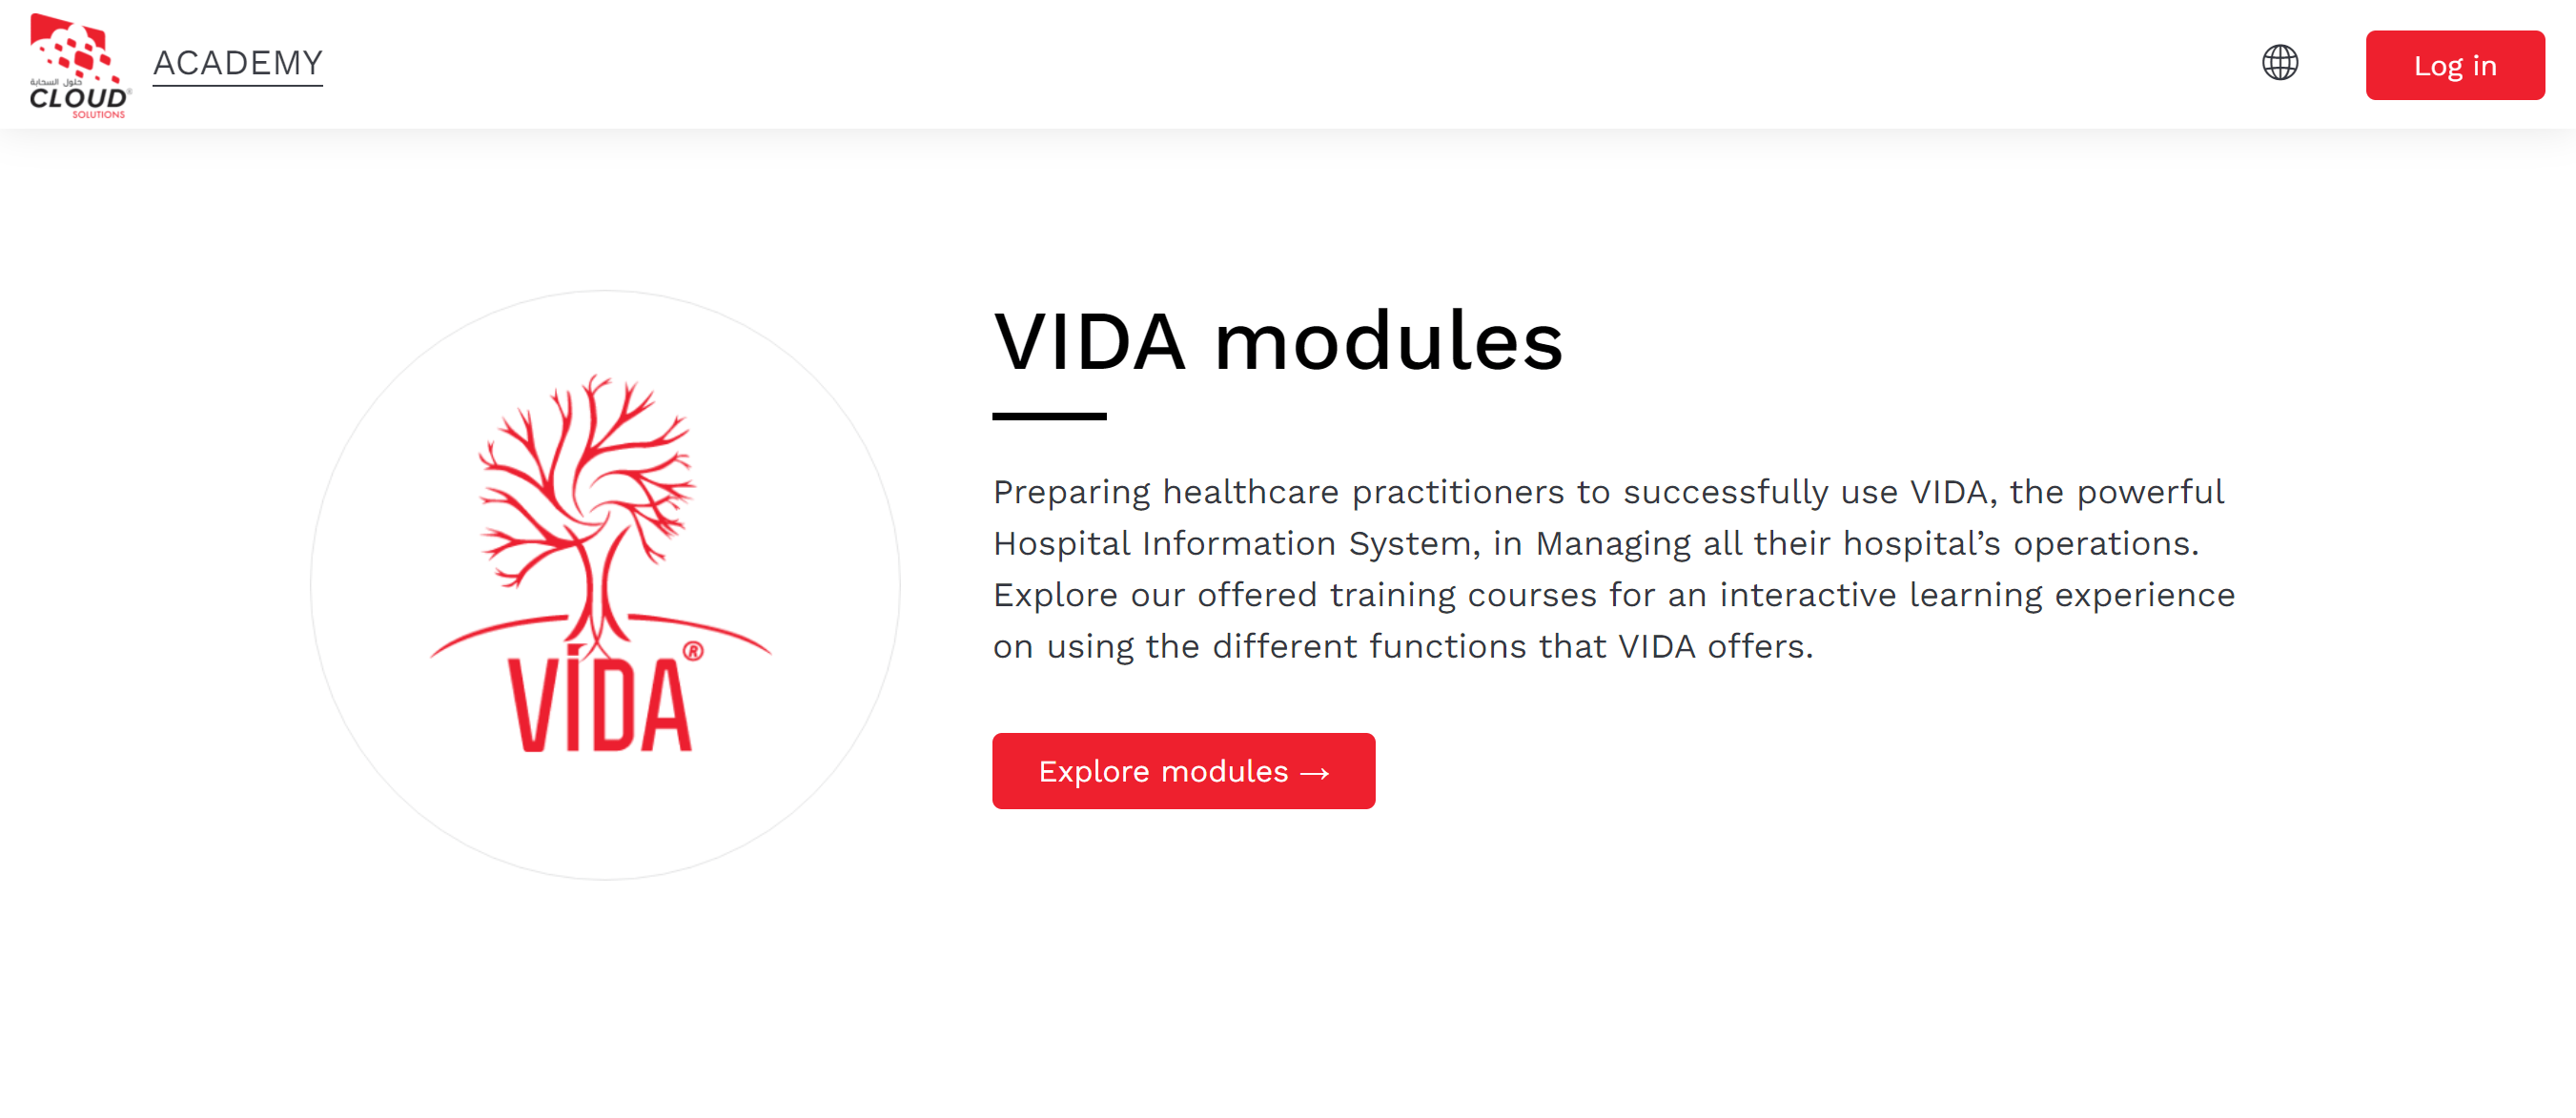 The introduction screen to Cloud Solutions Academy's VIDA Modules, which explains what the modules are about and has a call to action button that says Explore Modules